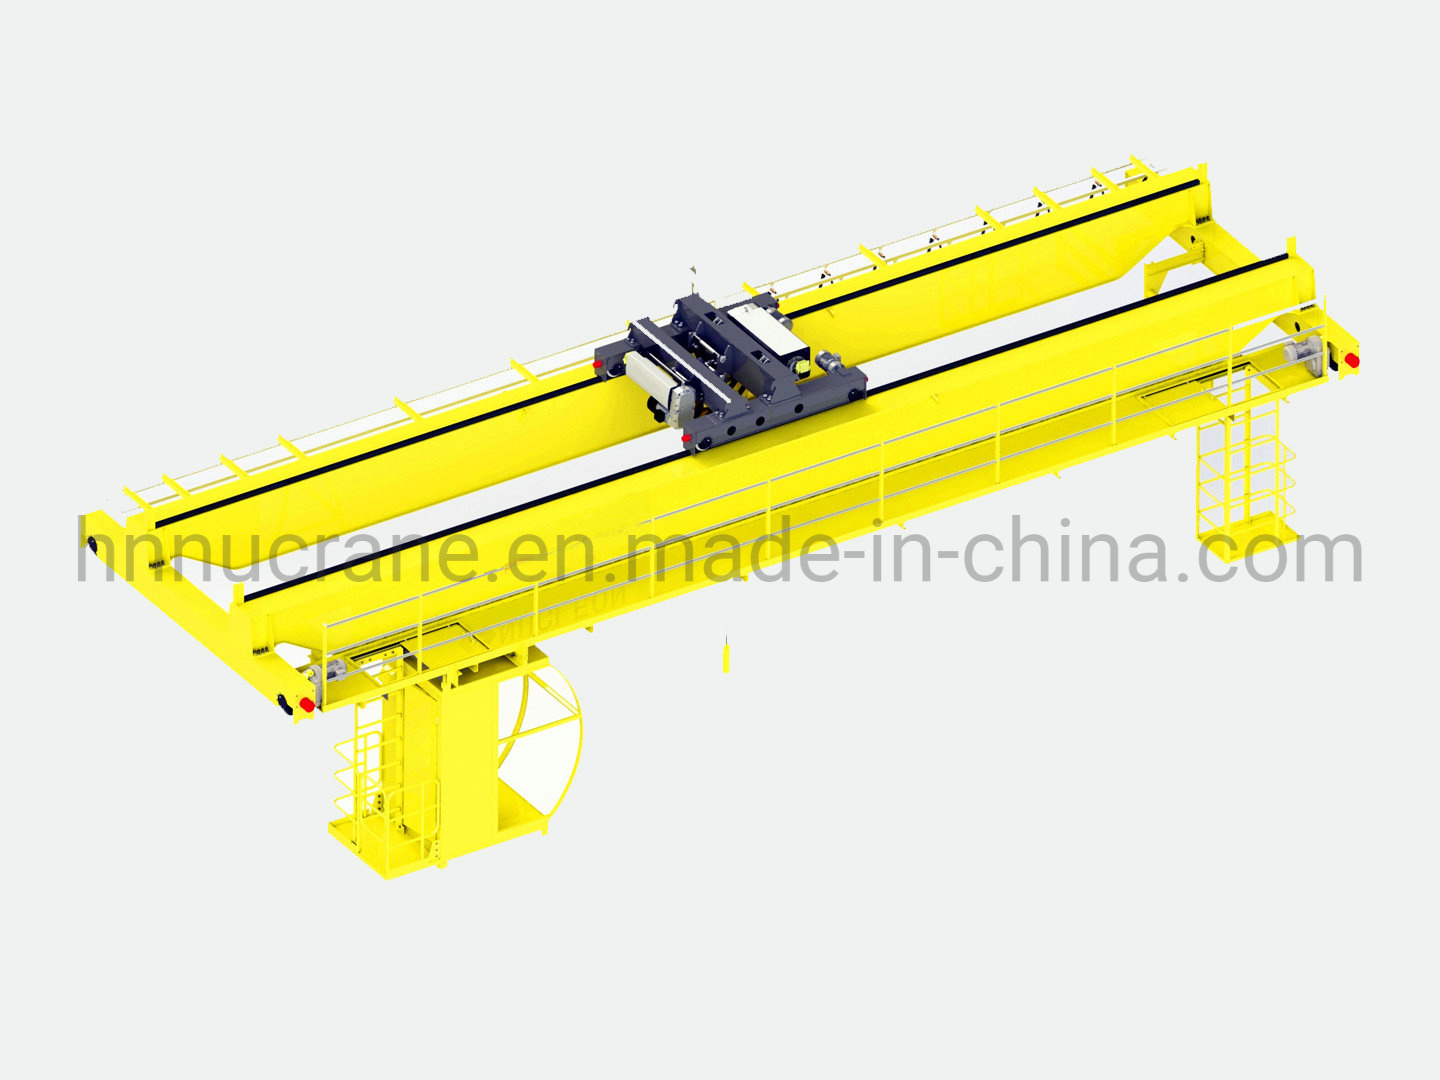 Popular Received by Most Customers Double Girder Bridge Crane